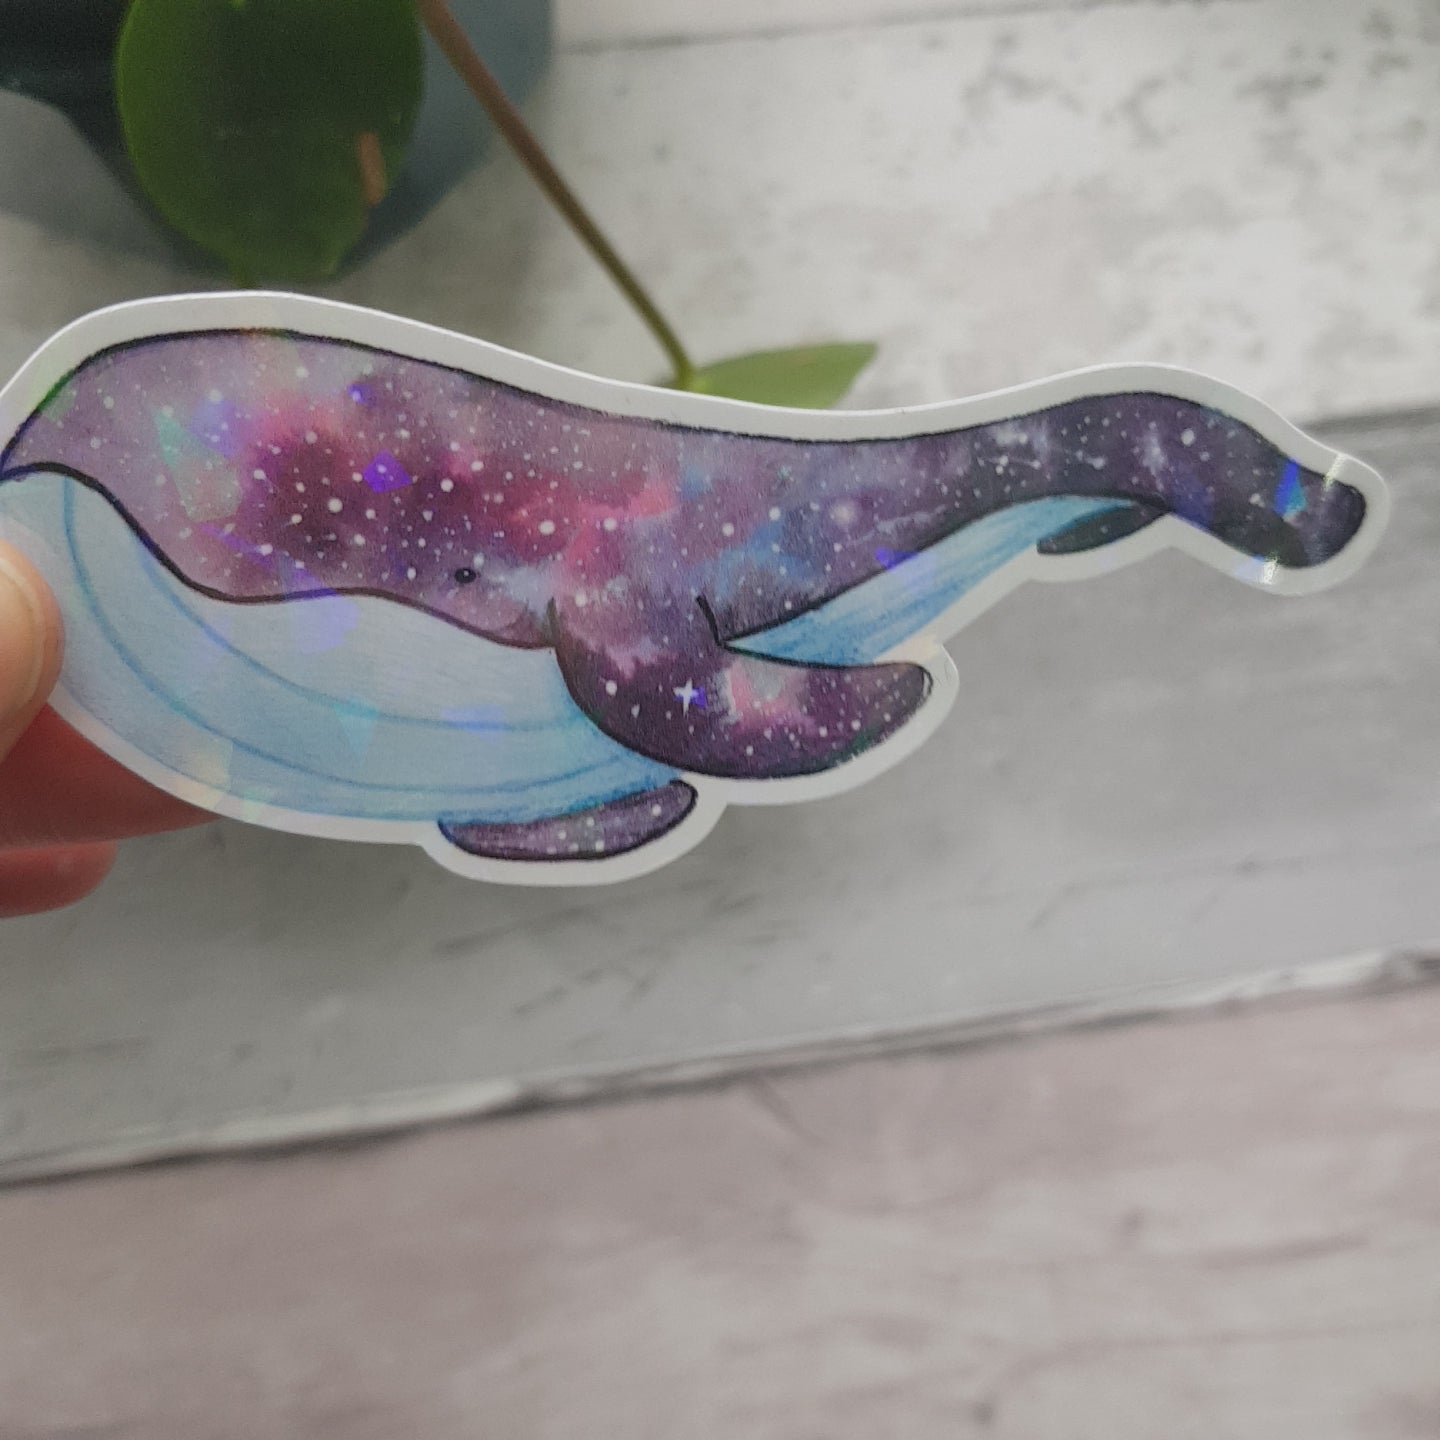 video showing the sparkling effect on the space whale vinyl sticker